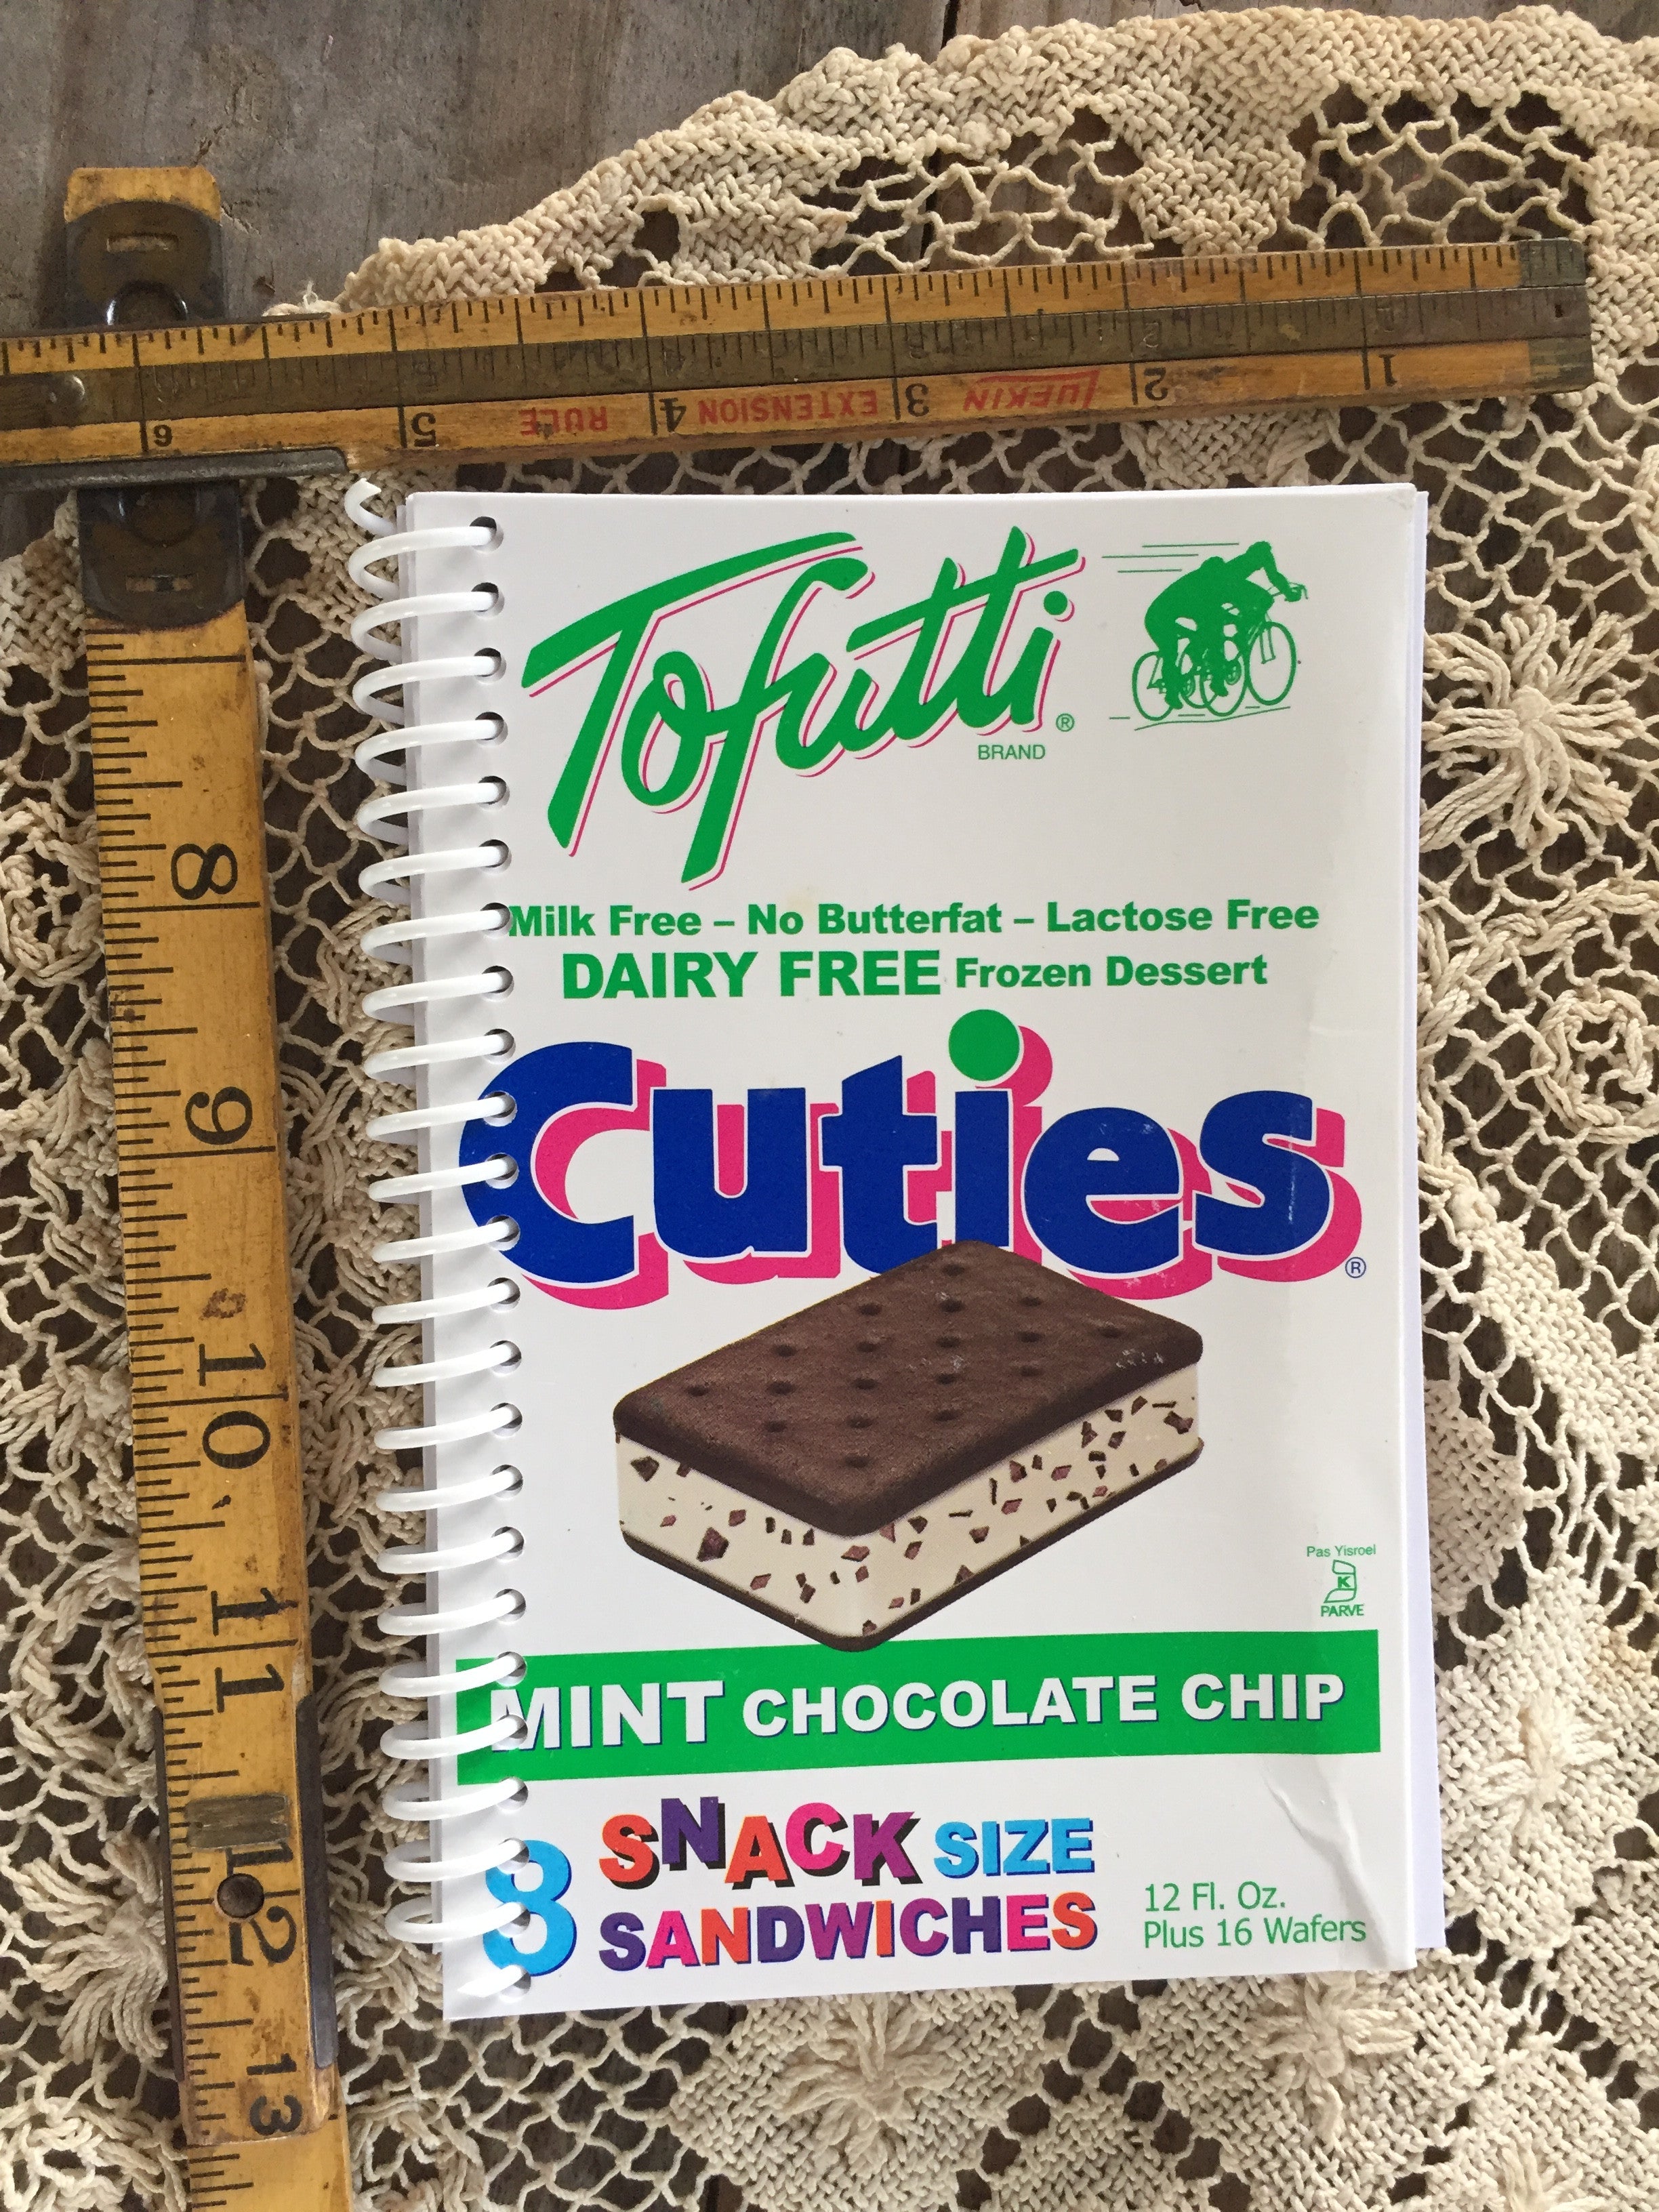 Tofutti Cuties Recycled Notebook